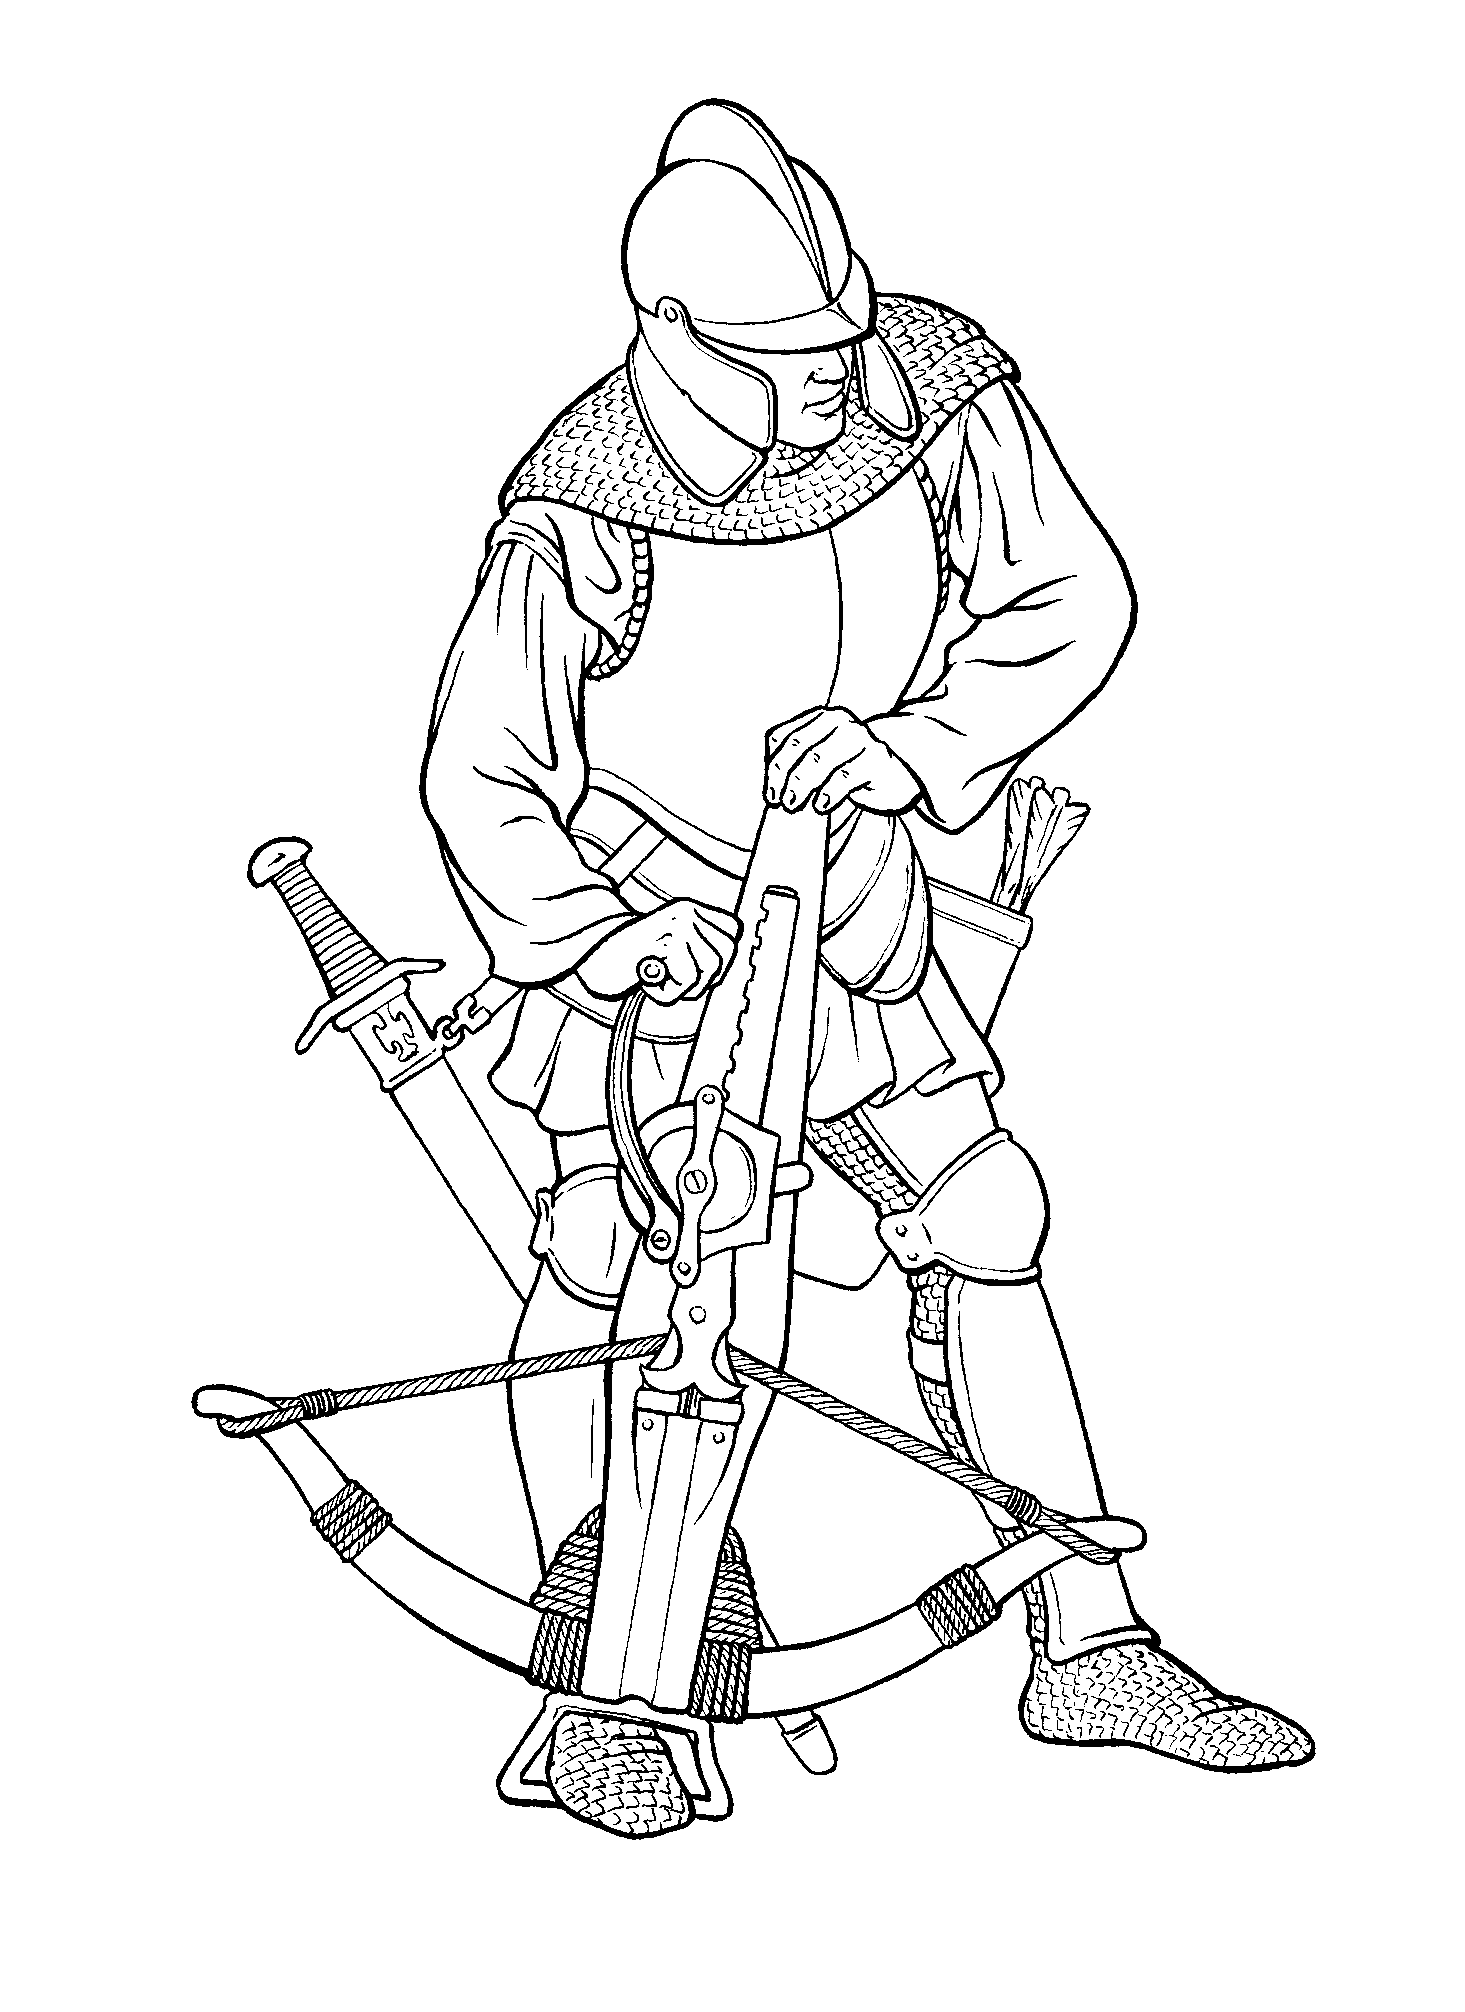 Coloring page - Warrior with a crossbow